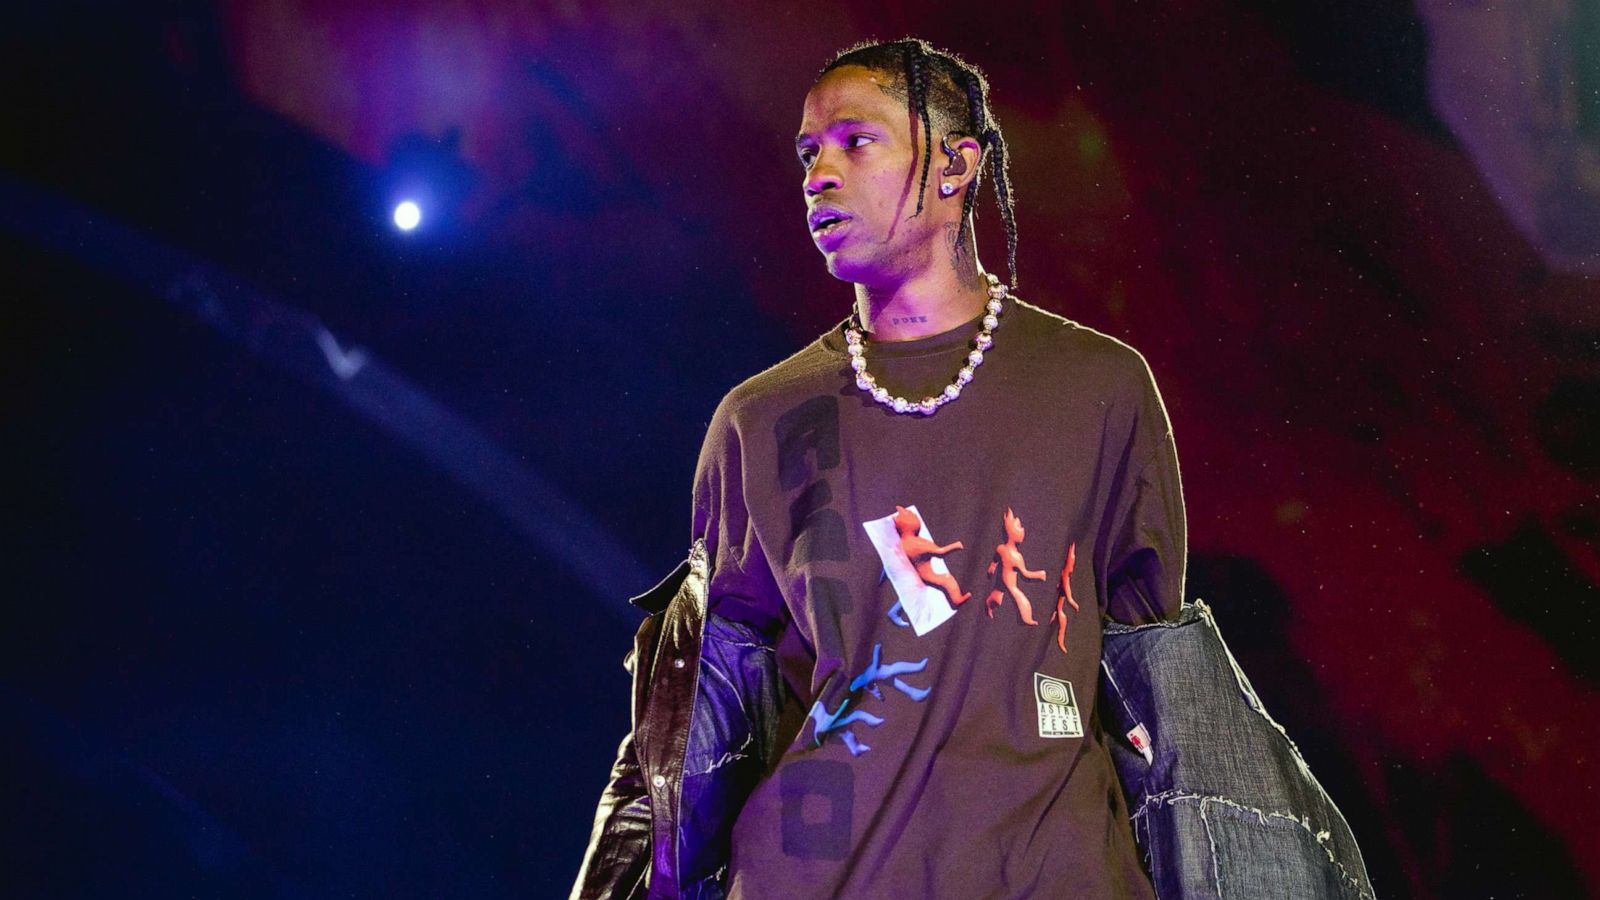 Man claims rapper Travis Scott punched him at nightclub: Police